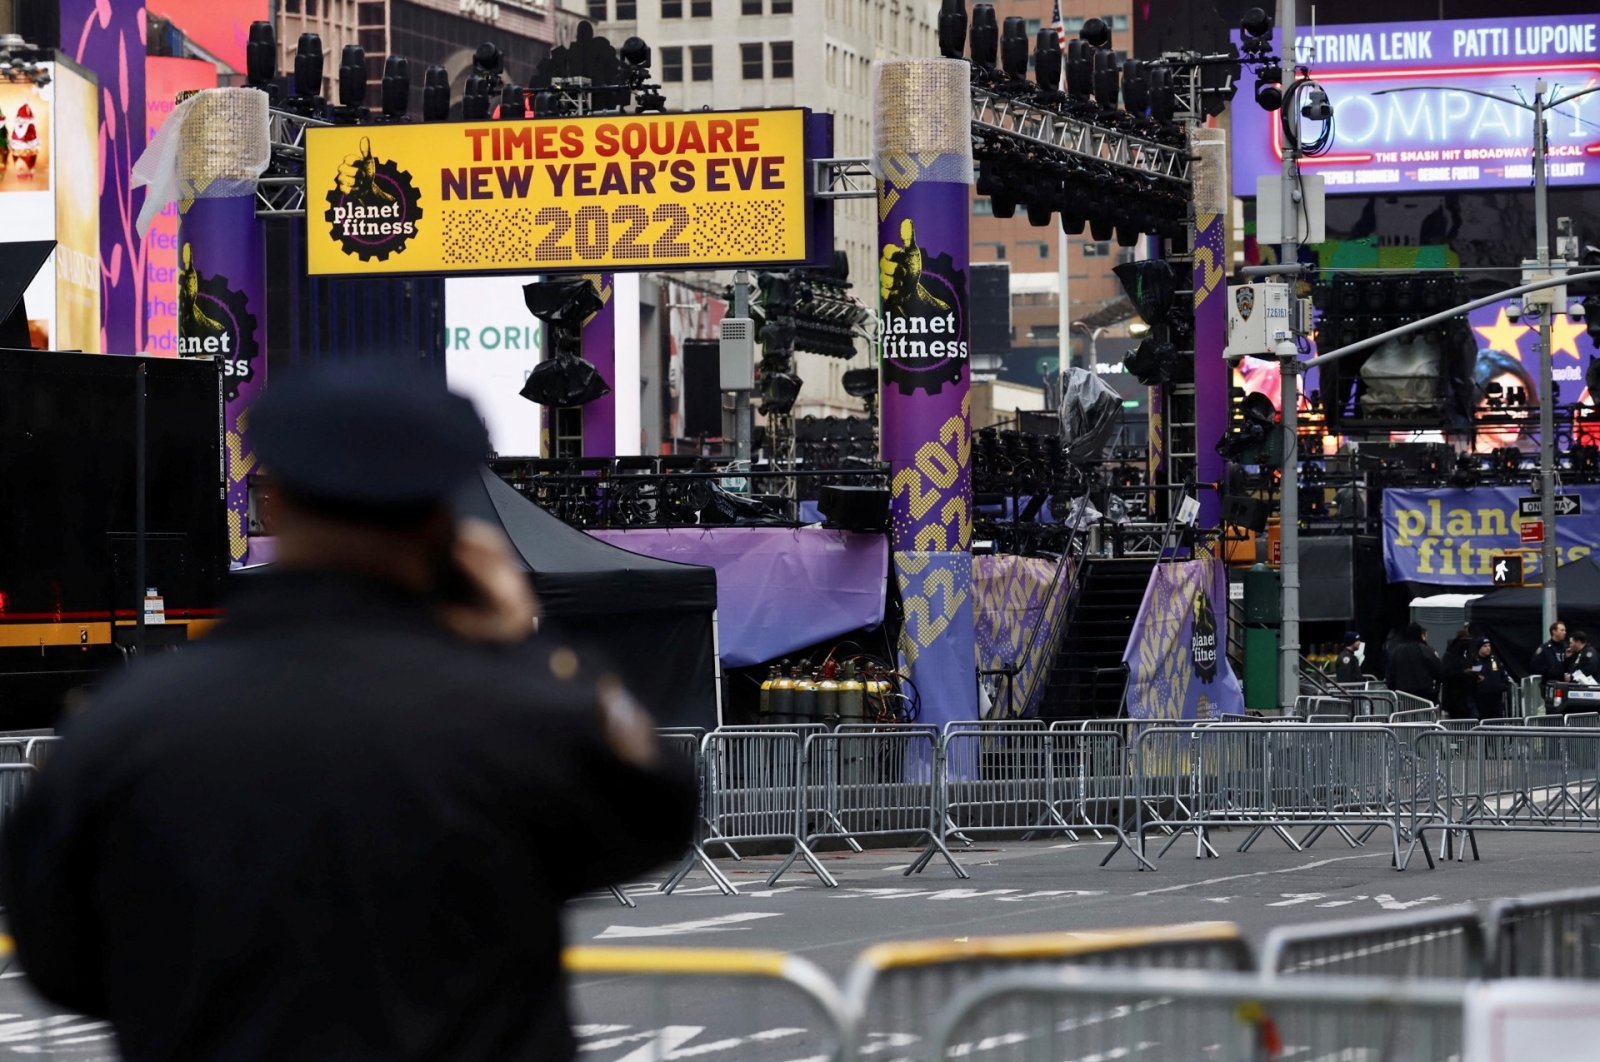 An officer from the New York City Police Department (NYPD) stands guard at Times Square ahead of New Year&#039;s Eve celebrations, New York City, U.S., Dec. 31, 2021. (Reuters Photo)